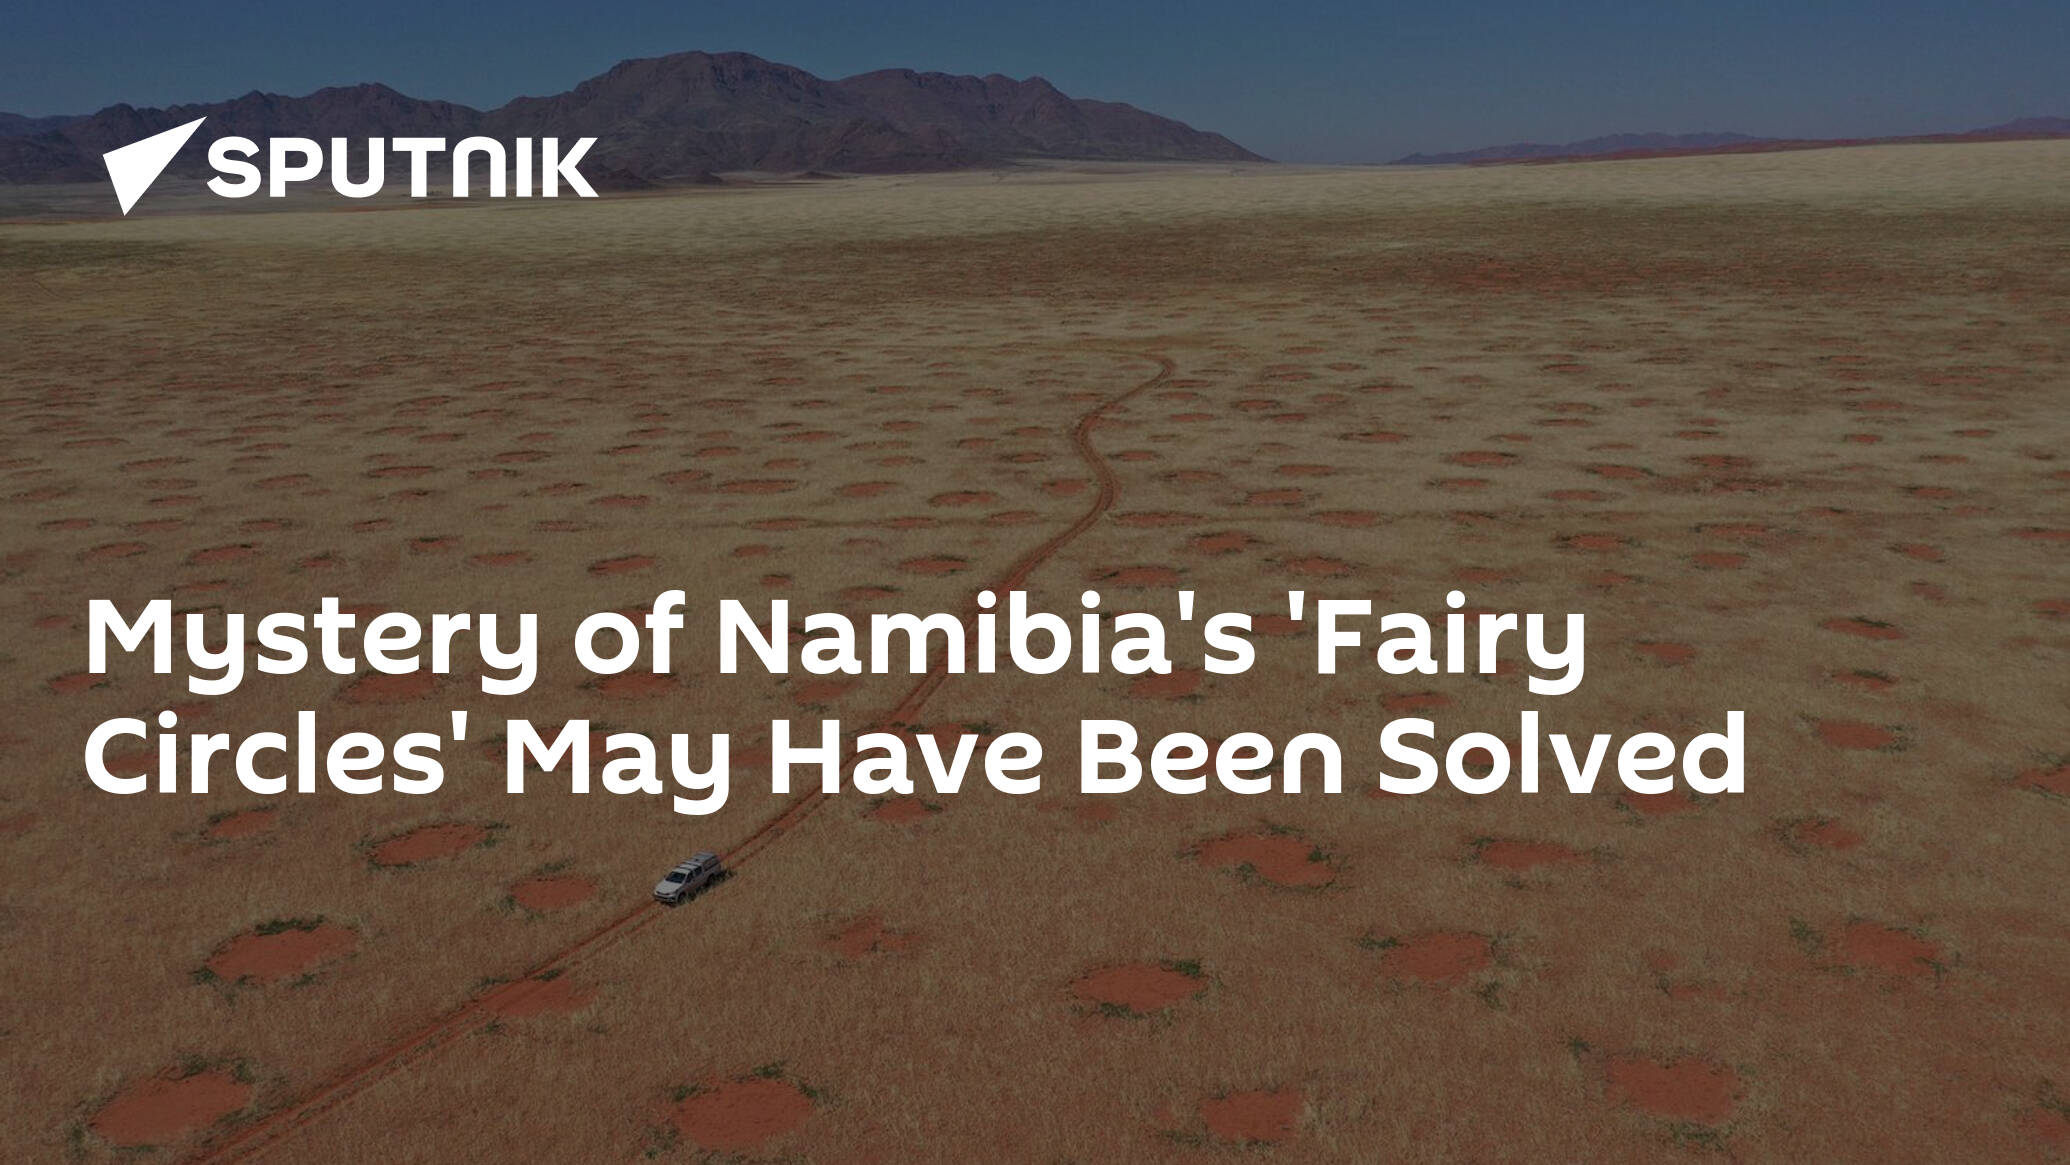 Mystery of Namibia's 'Fairy Circles' May Have Been Solved - 30.10